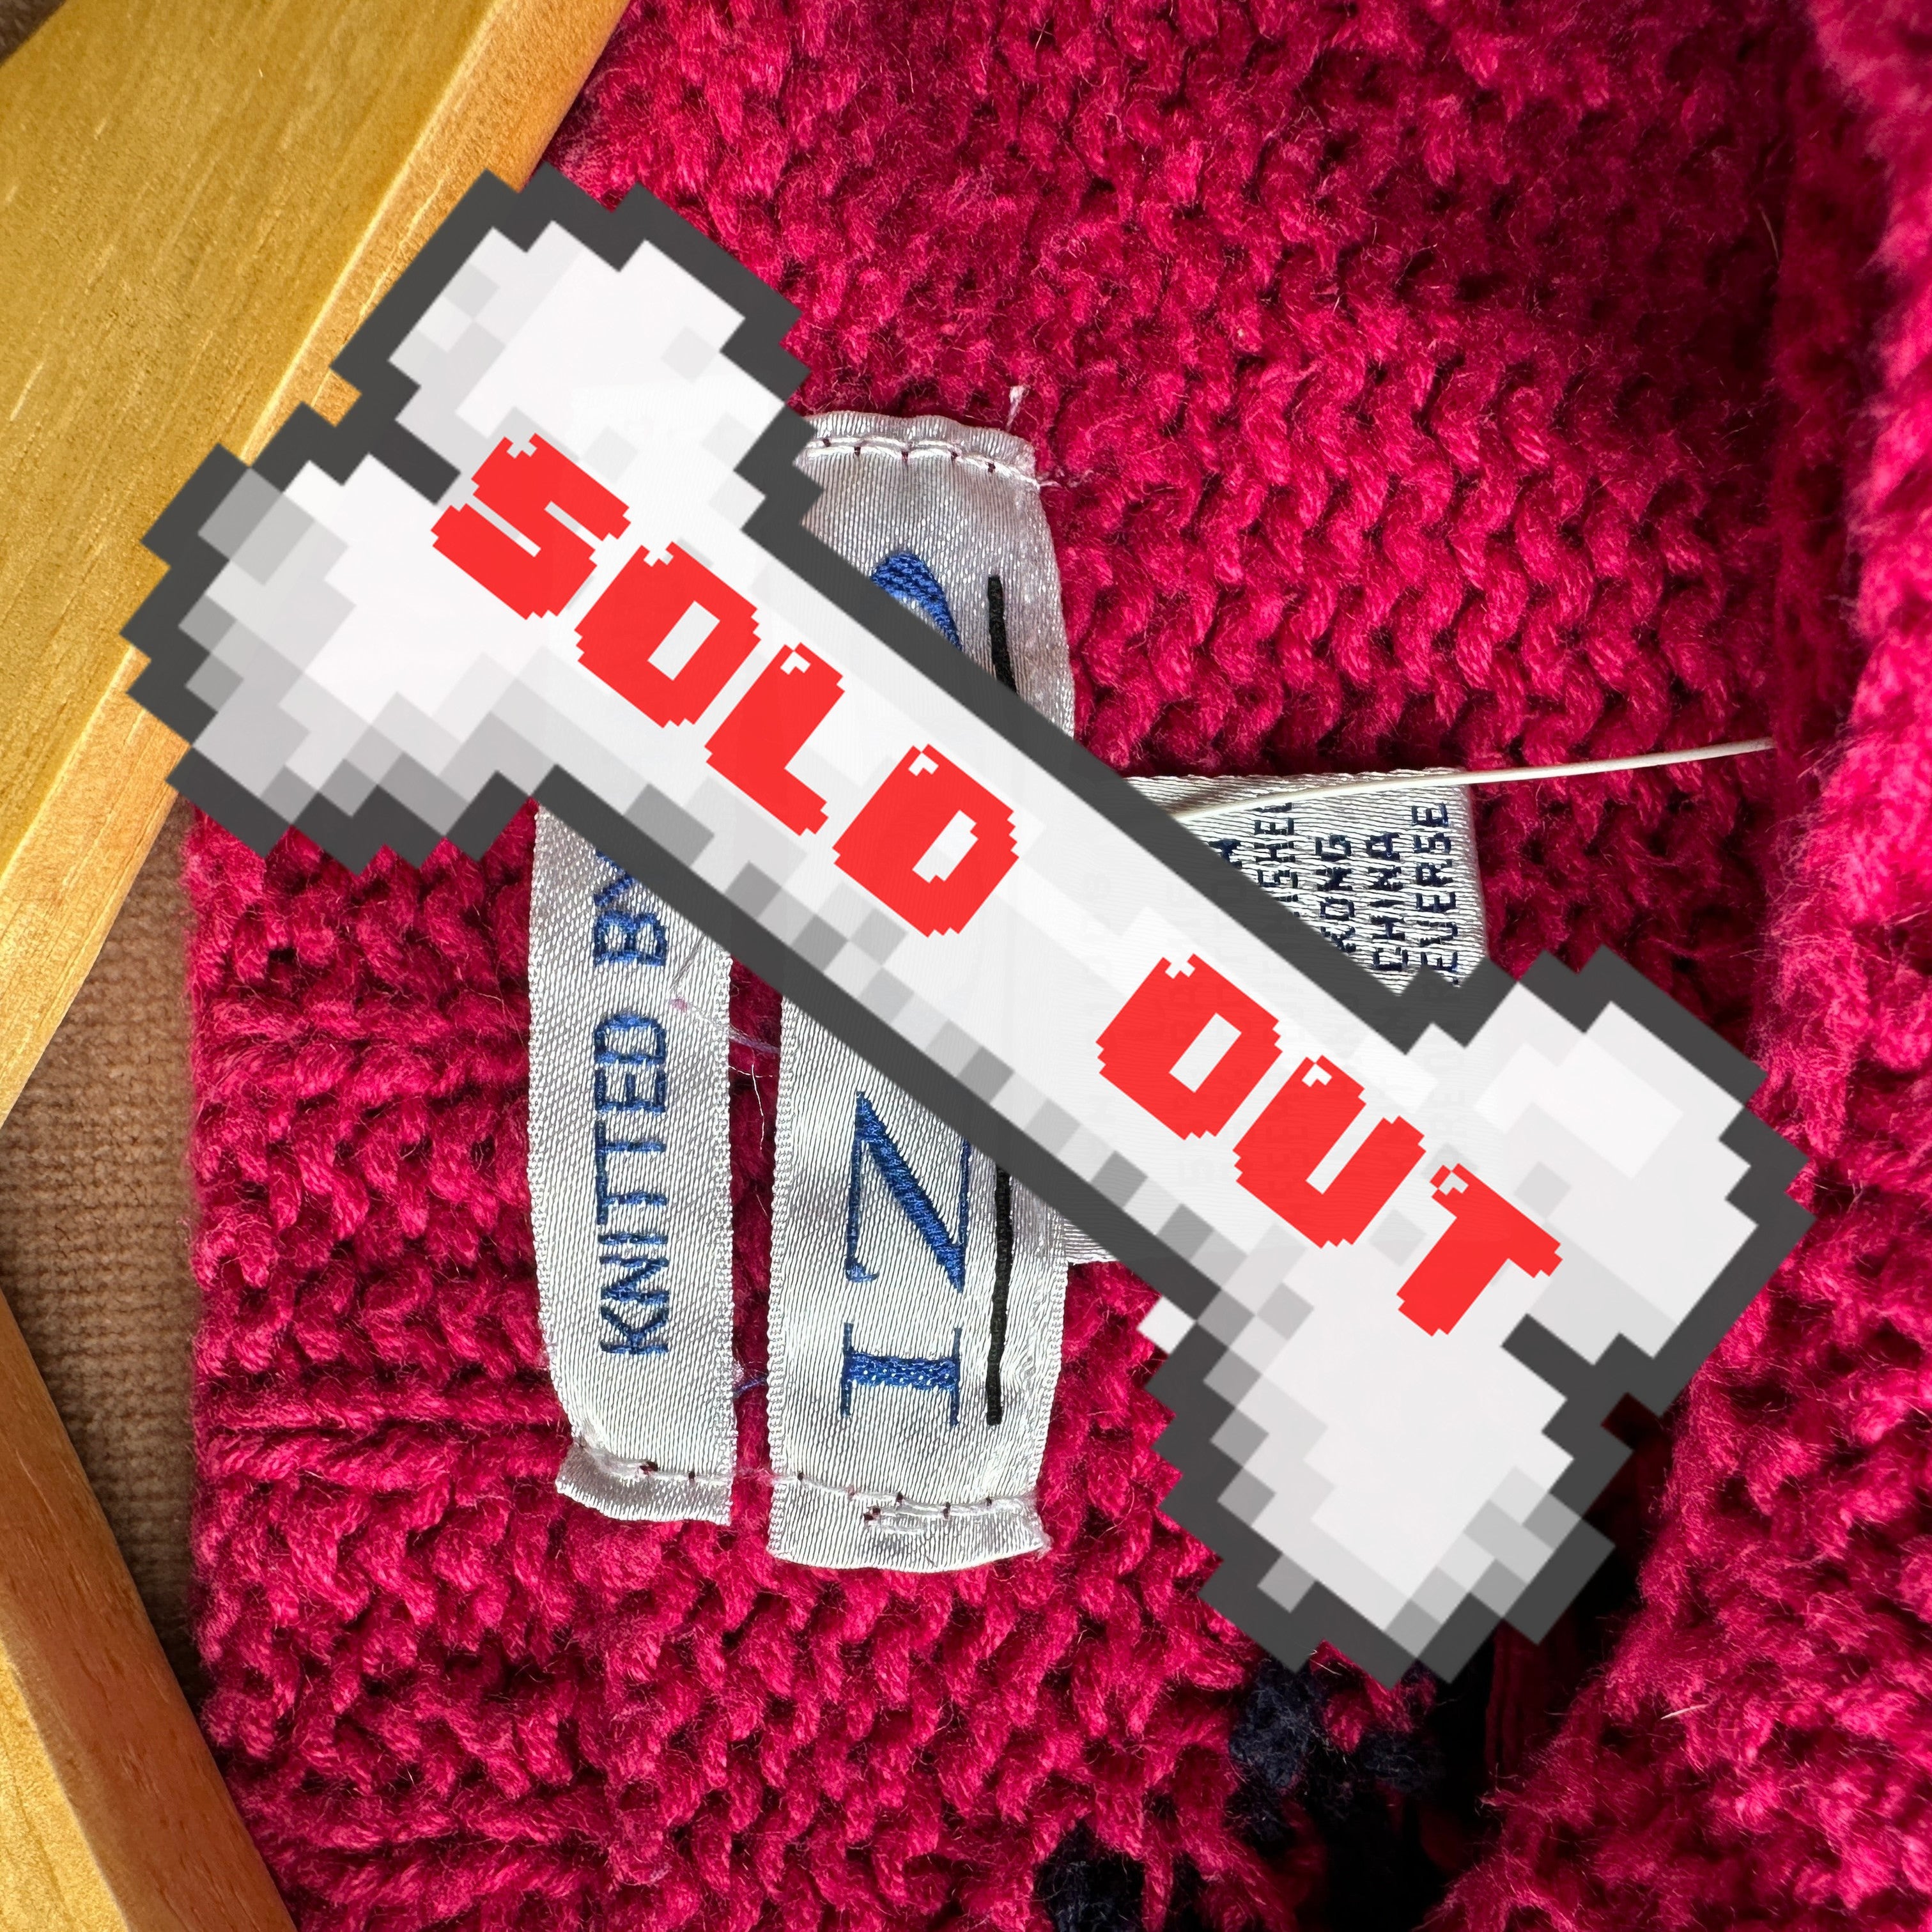 80s Hot Pink Hand-Knitted “Izod” Sweater